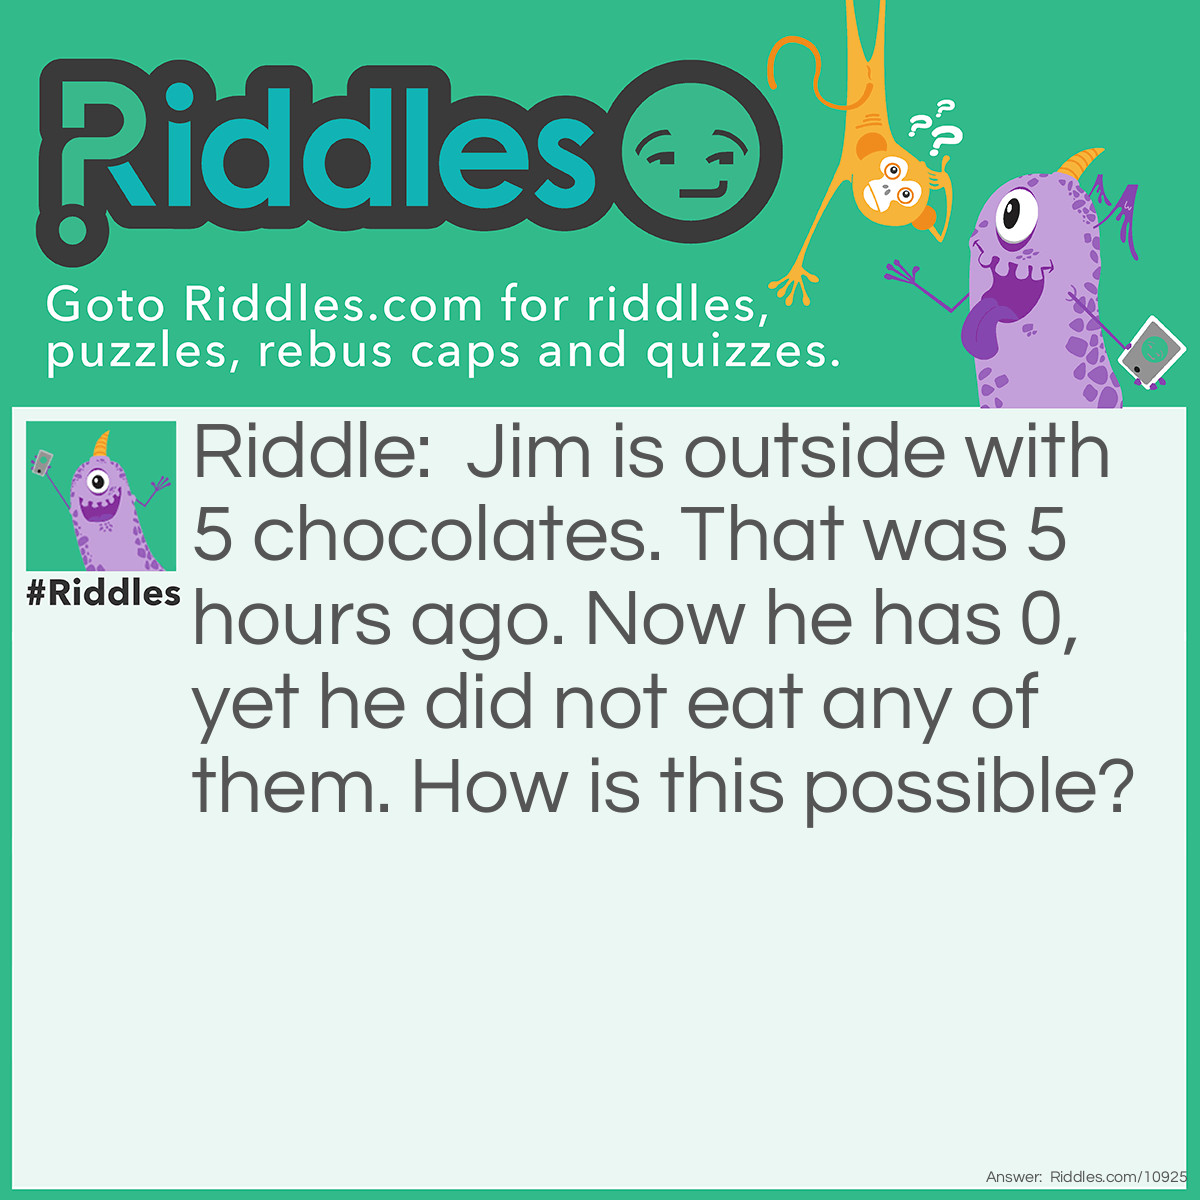 Riddle: Jim is outside with 5 chocolates. That was 5 hours ago. Now he has 0, yet he did not eat any of them. How is this possible? Answer: They all melted.